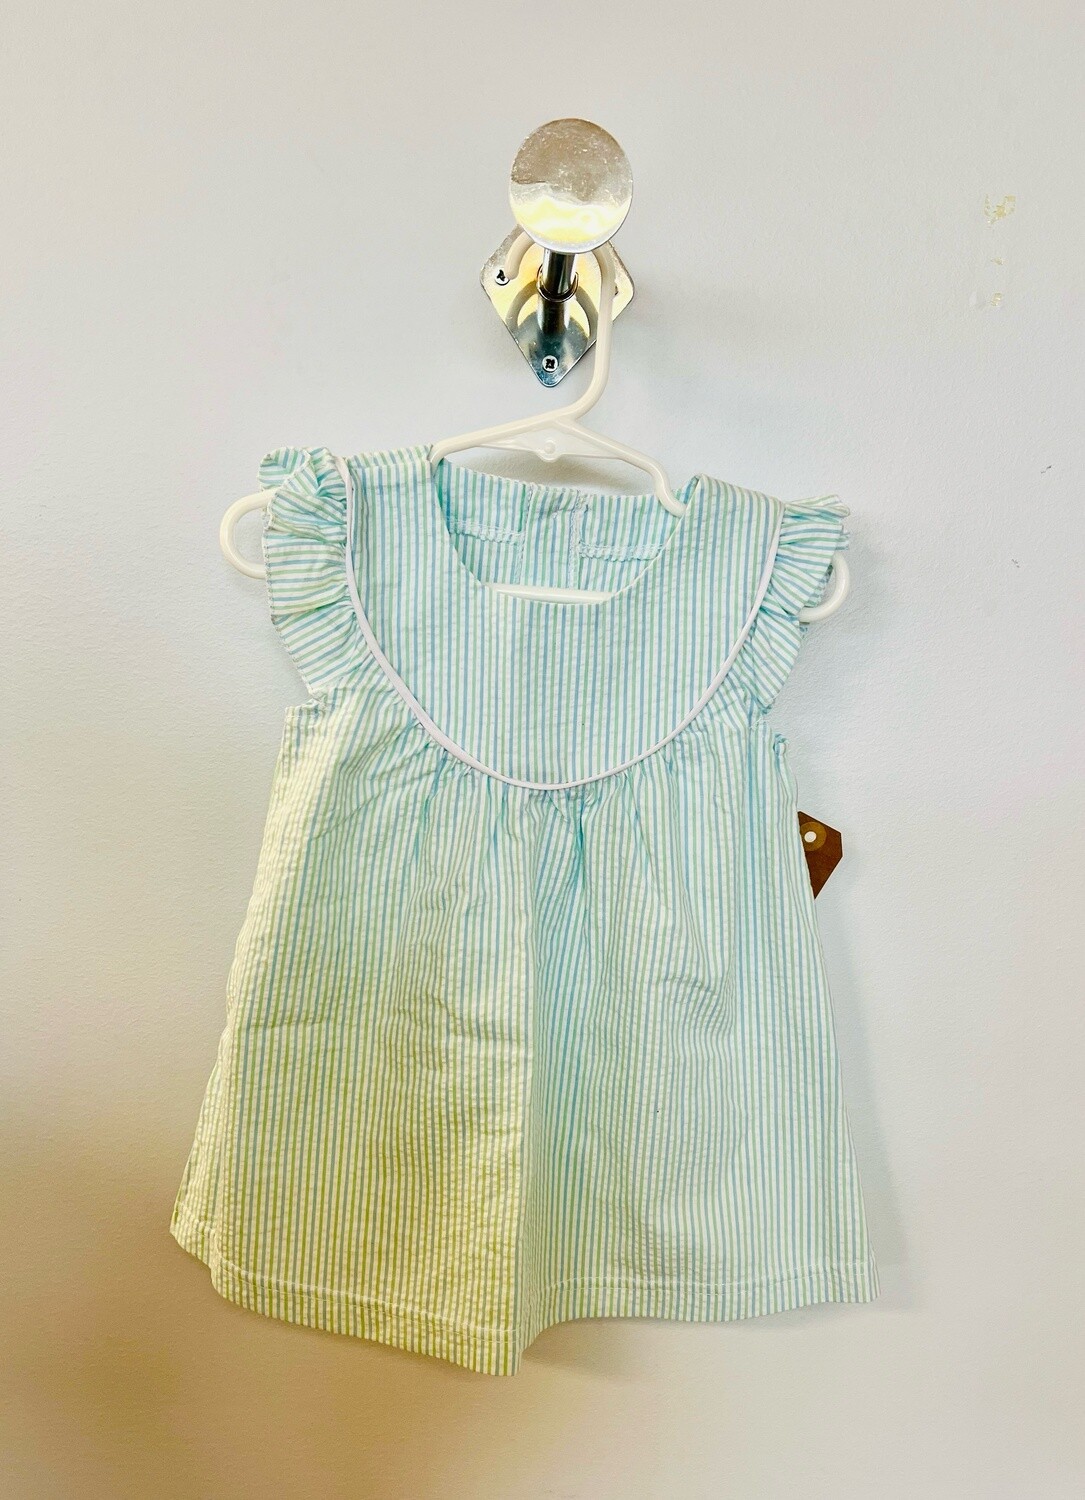 Childrens Seersucker Dress - Turquoise/Mint, name: 12 Month